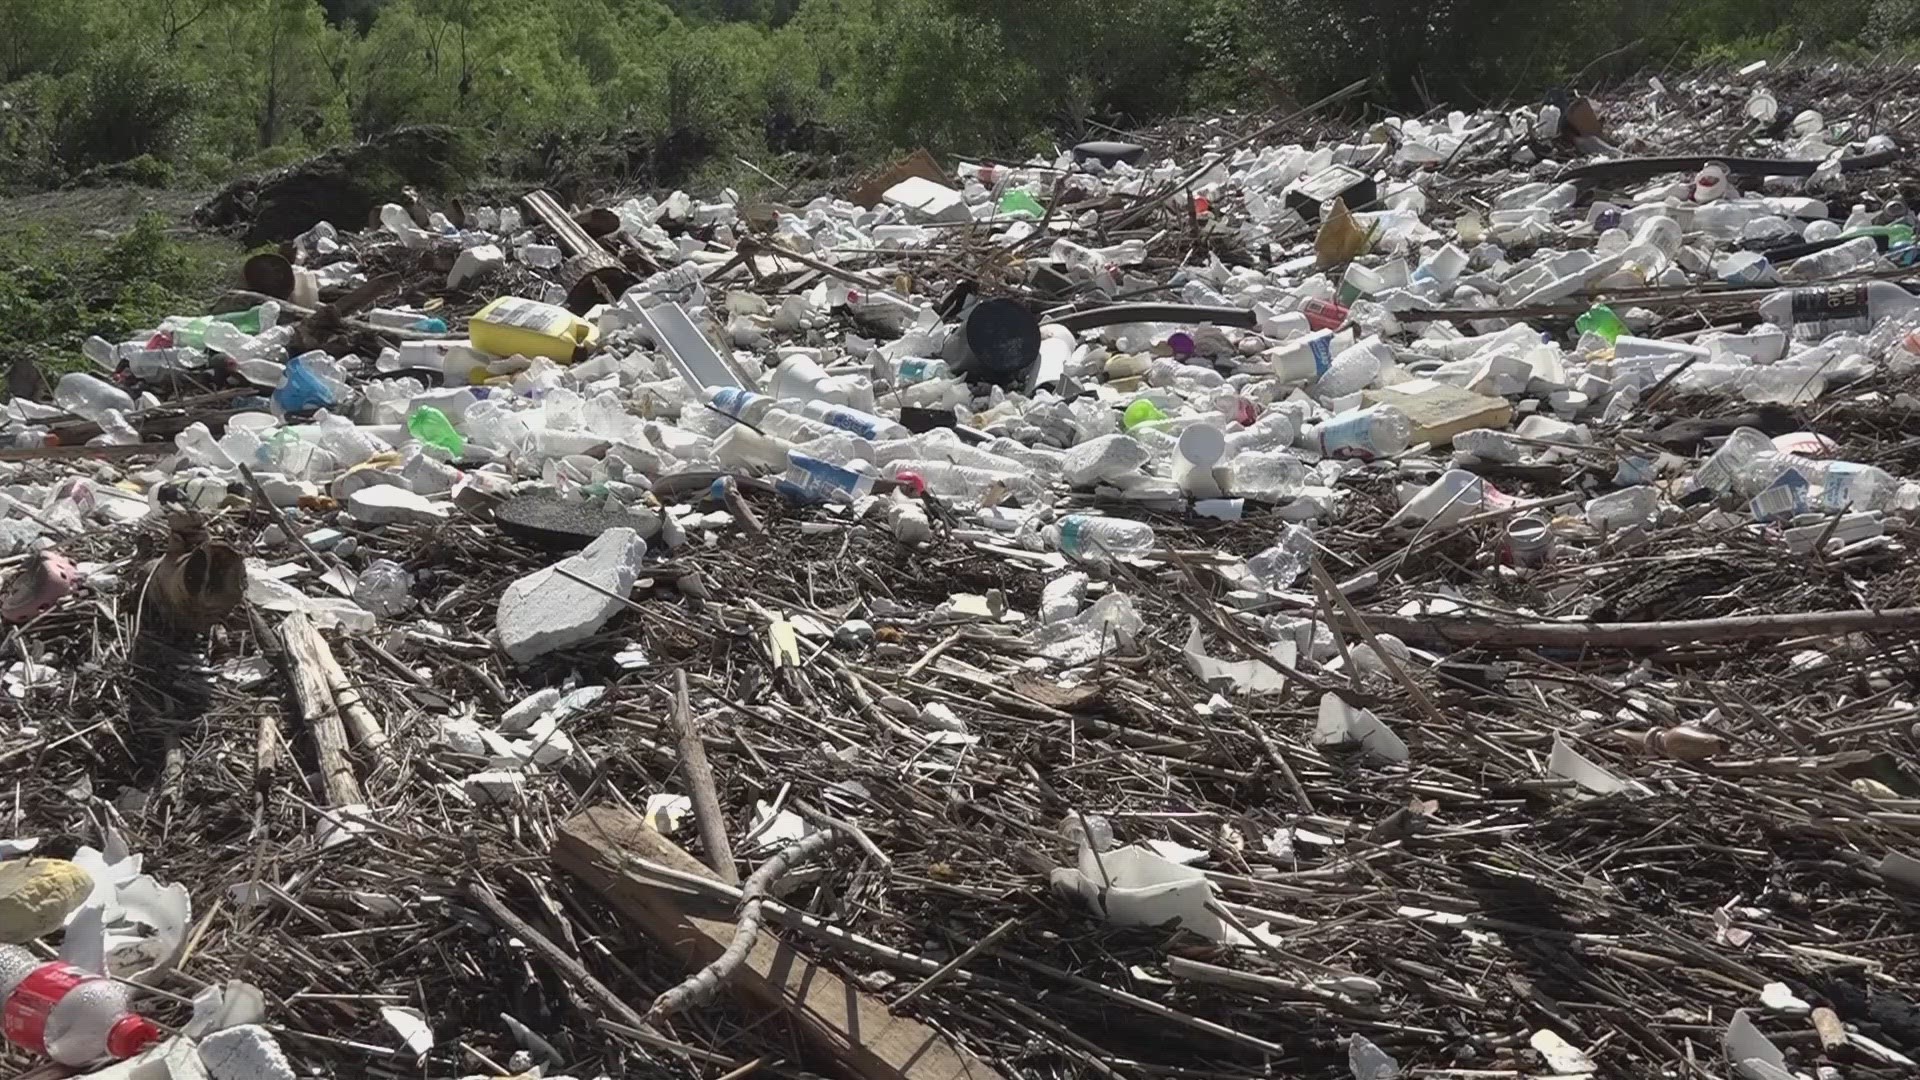 Cleanup workers are struggling to remove mountains of floatable debris.